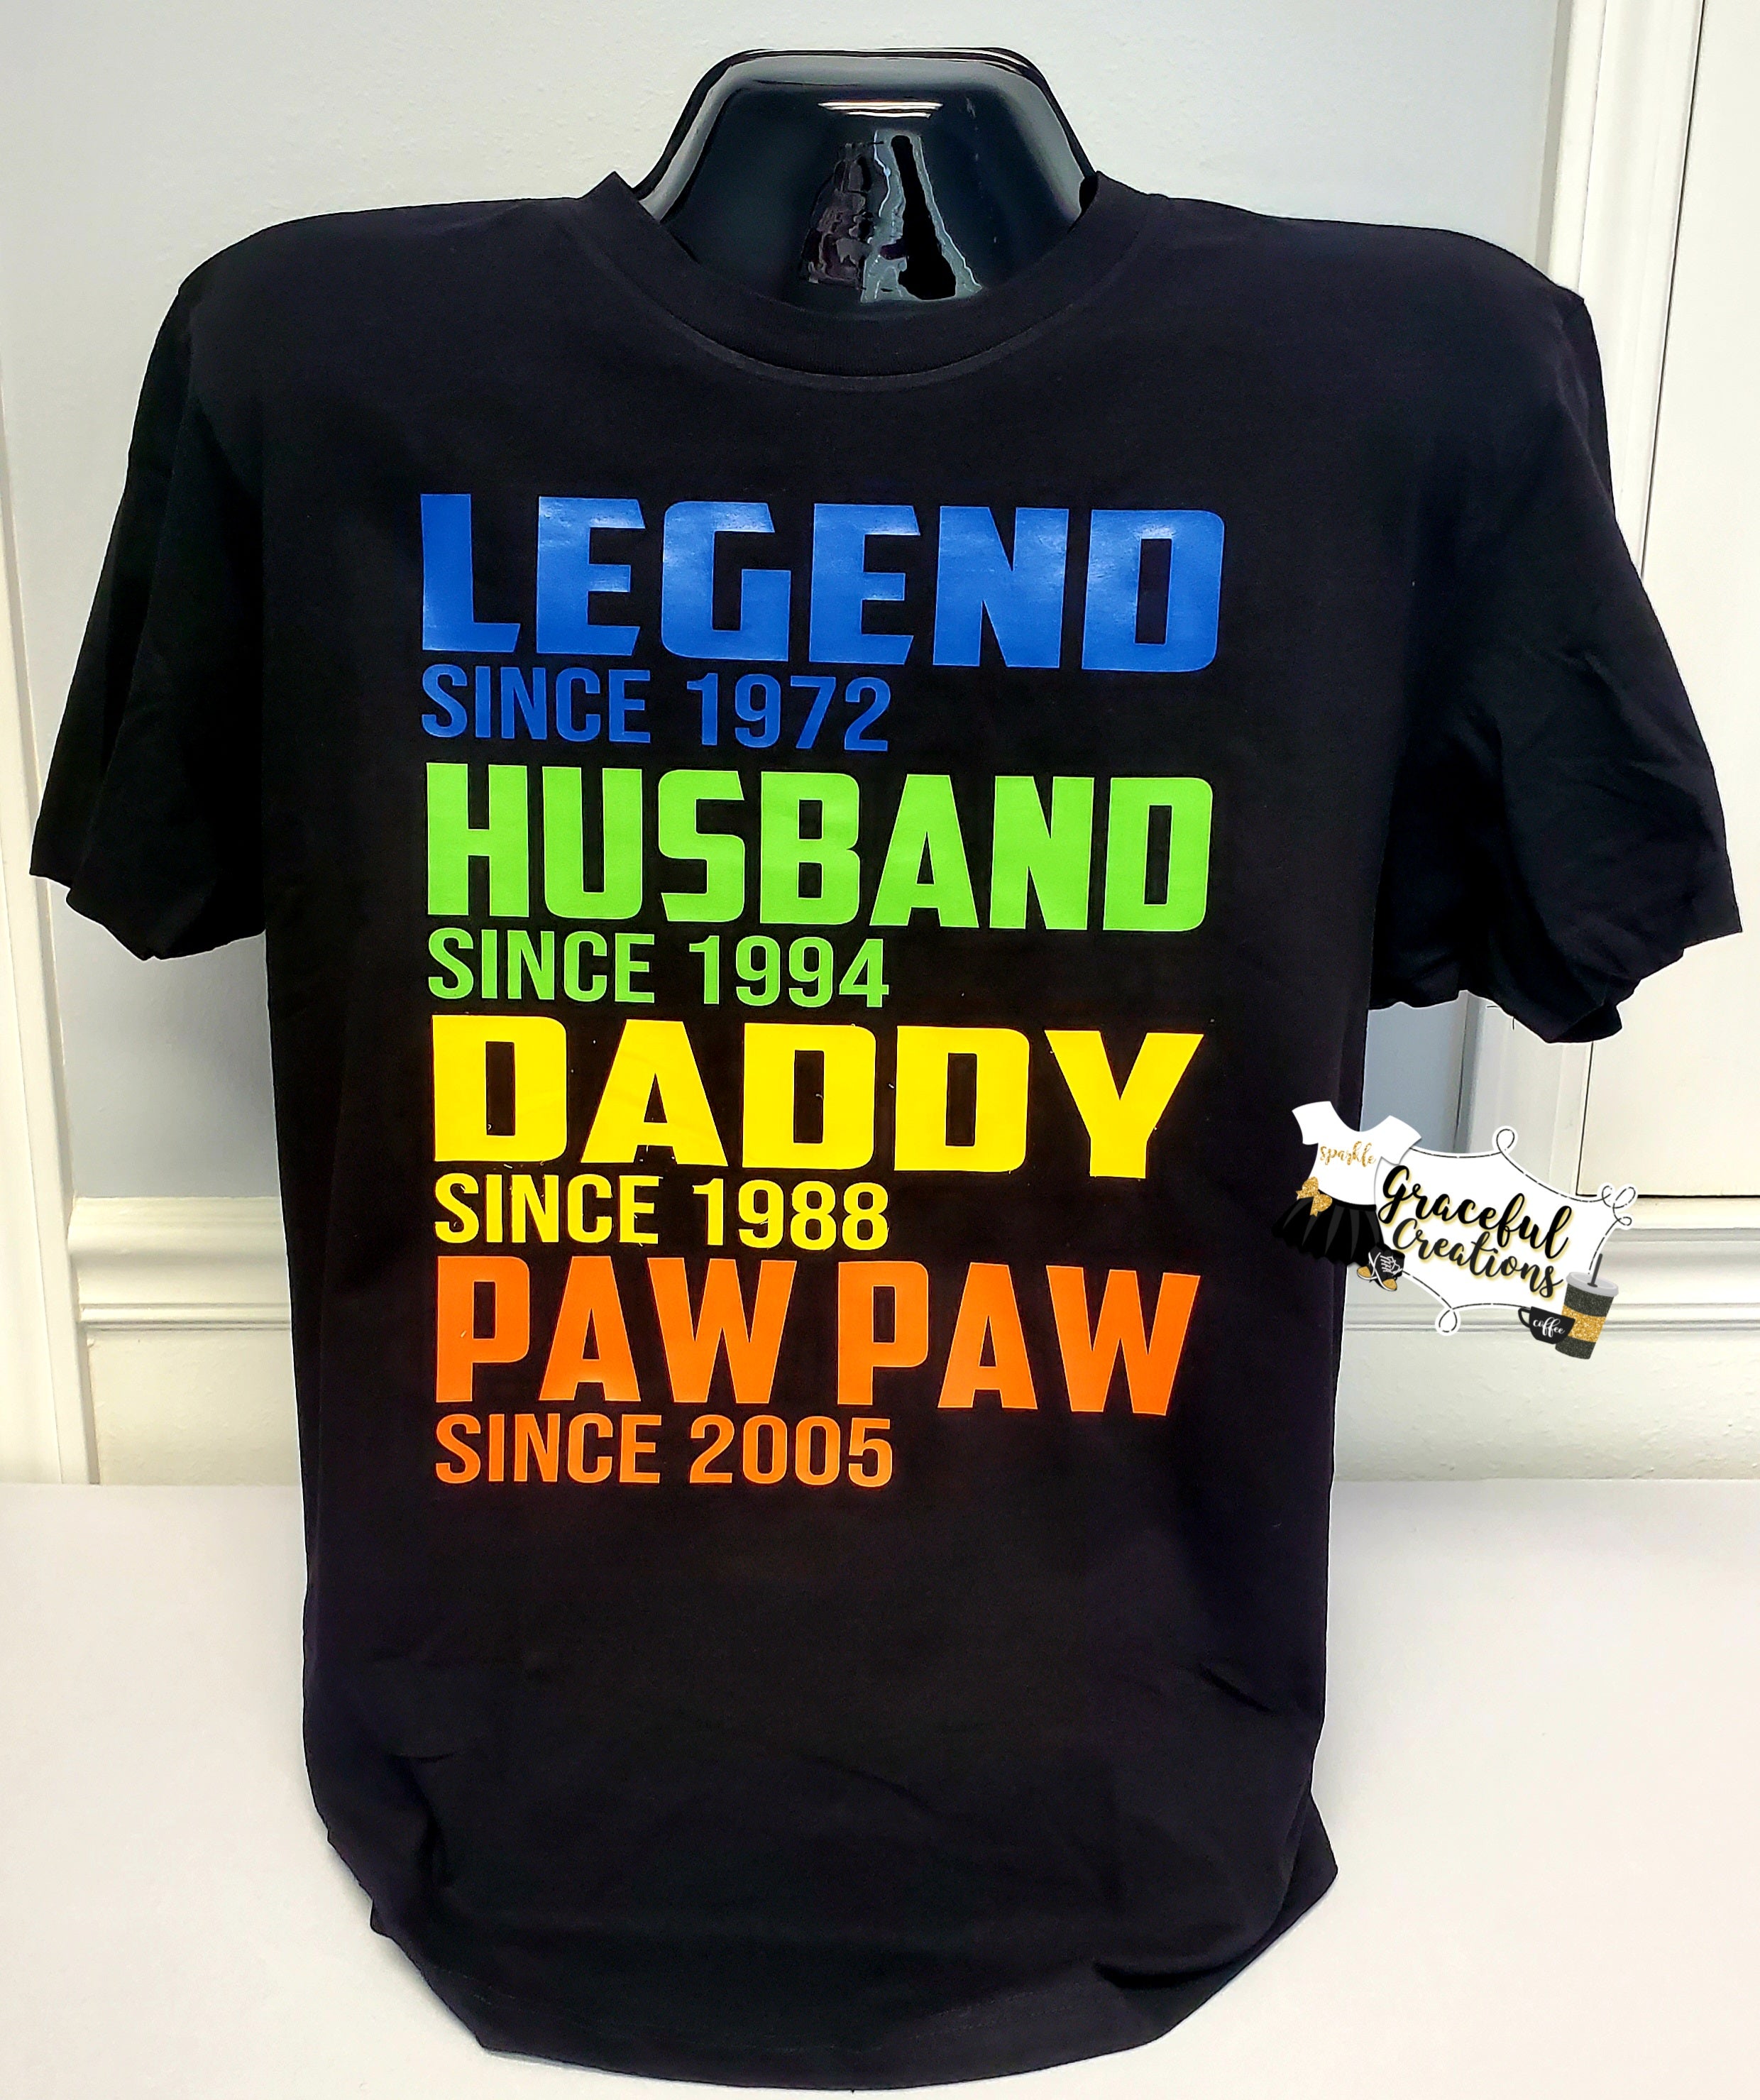 Father's Legend Tee with dates